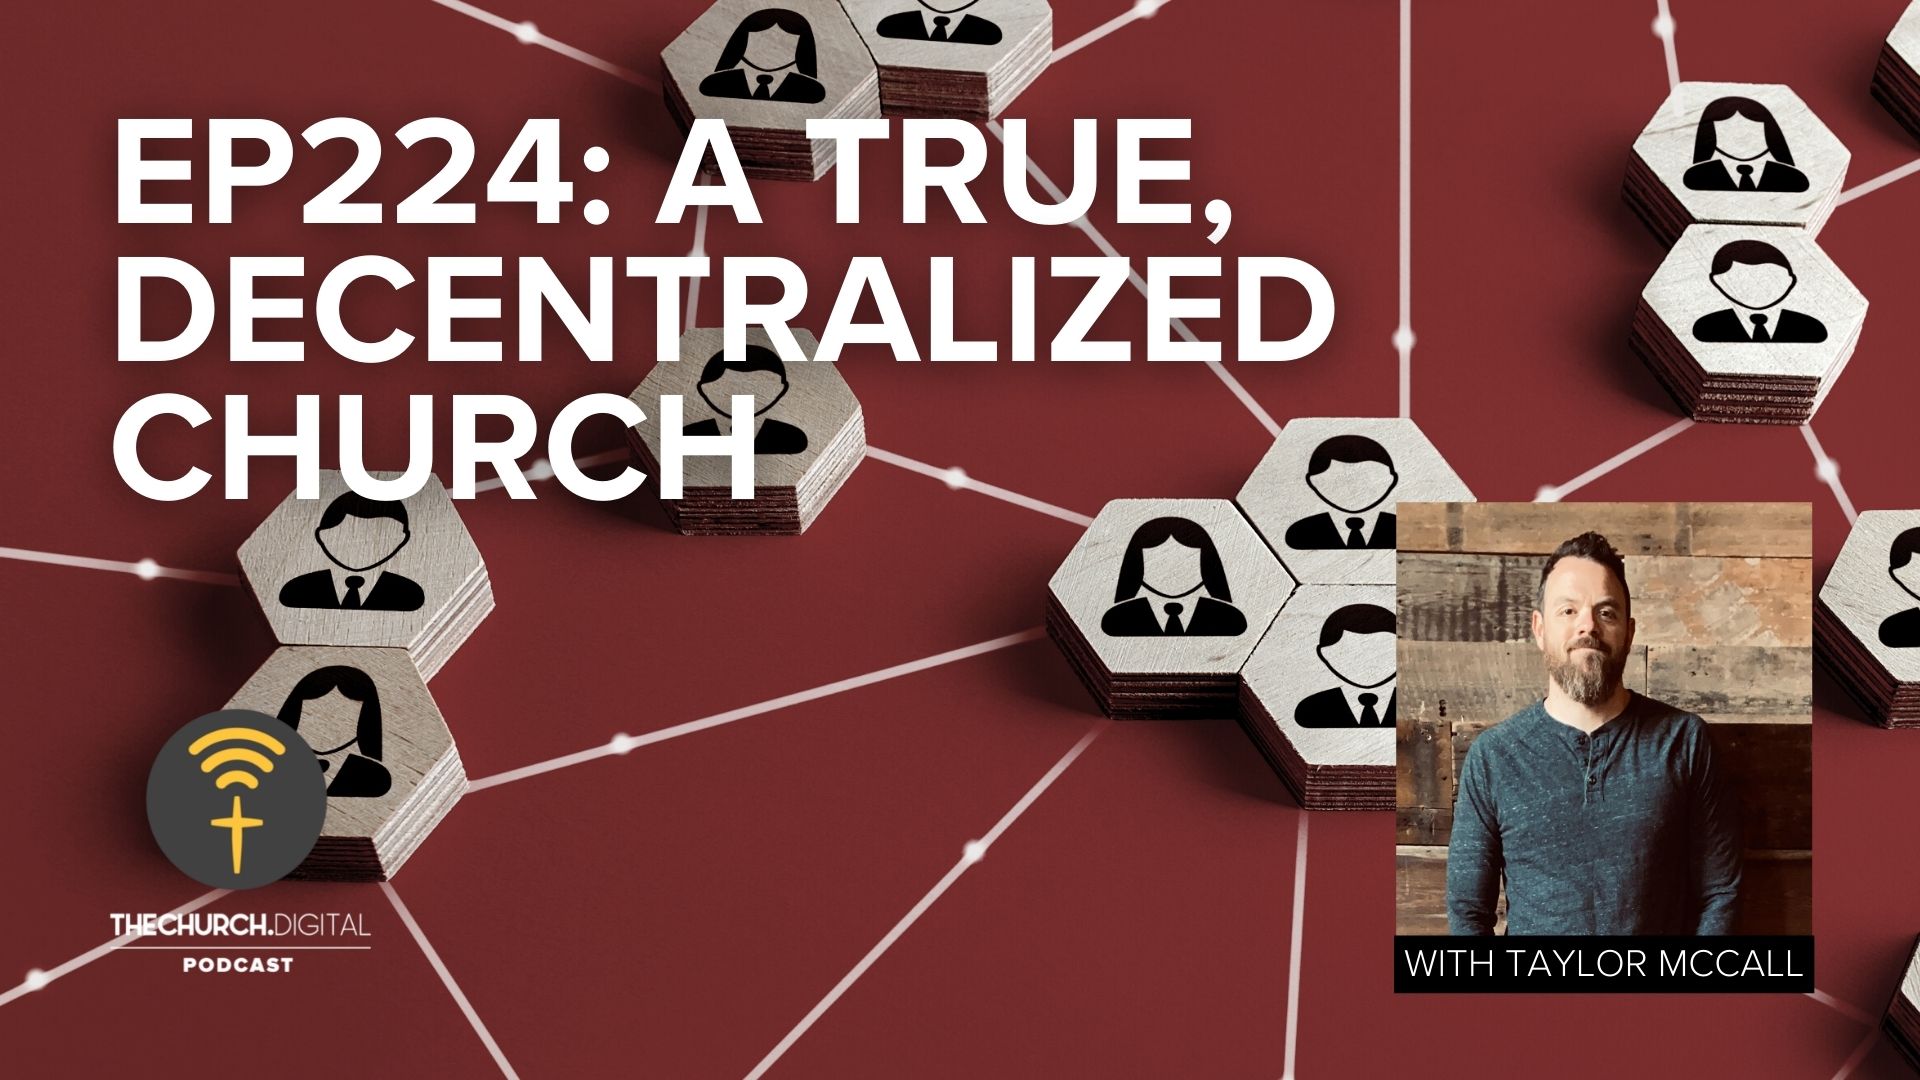 EP224: Taylor McCall & How a Decentralized Microchurch Impacts the City